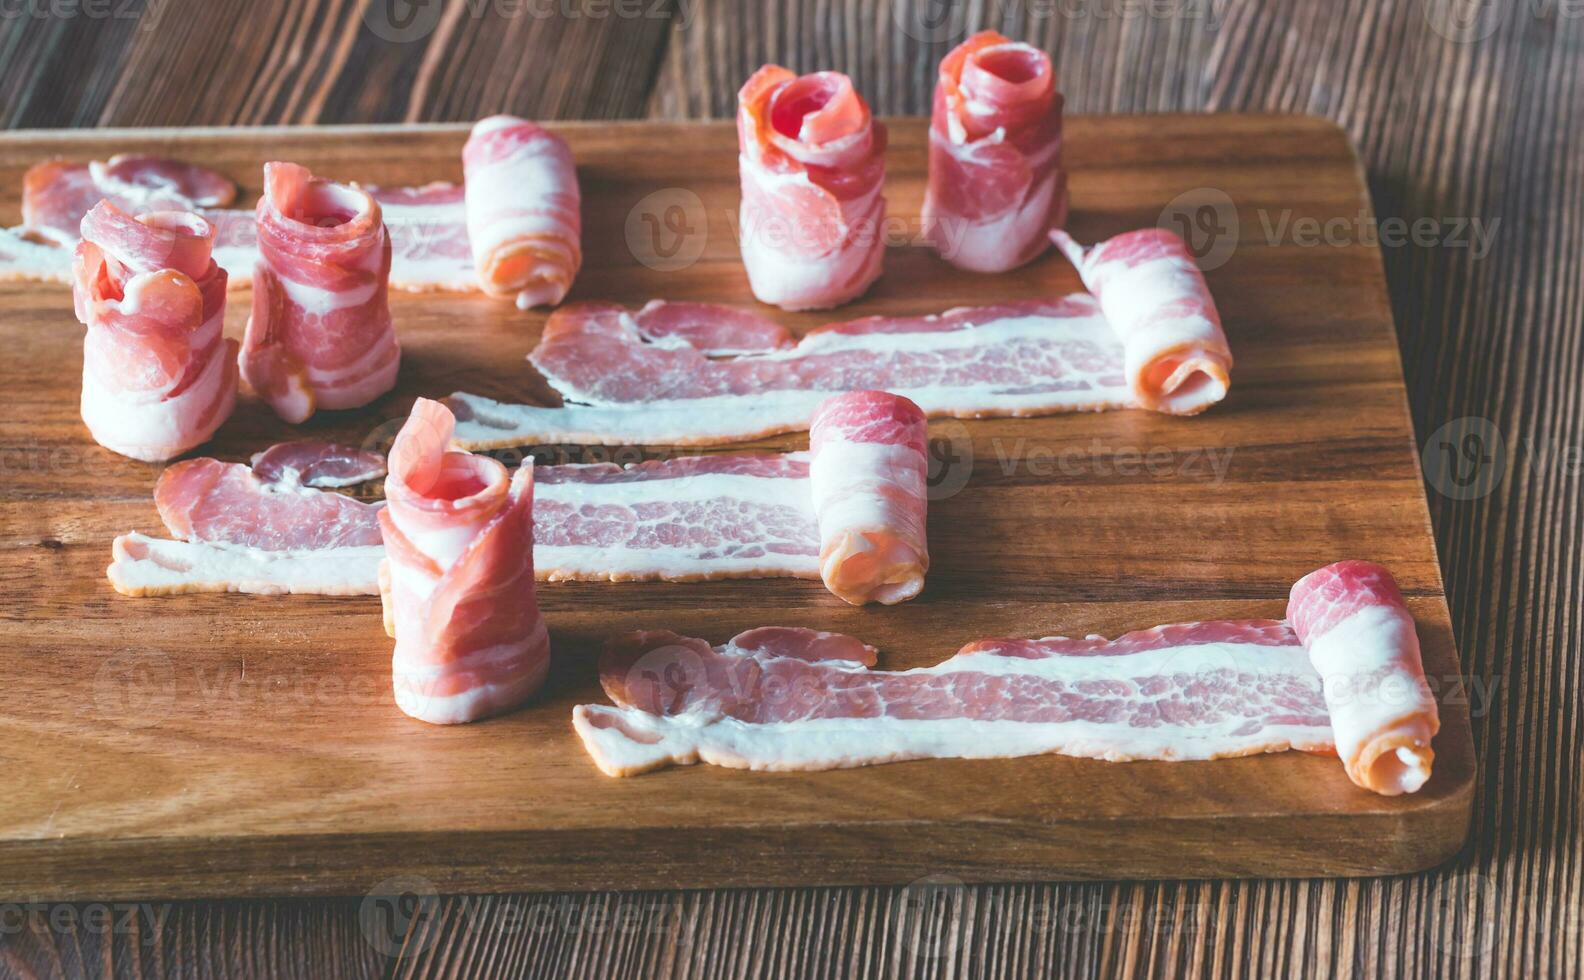 Bacon strips on the wooden board photo